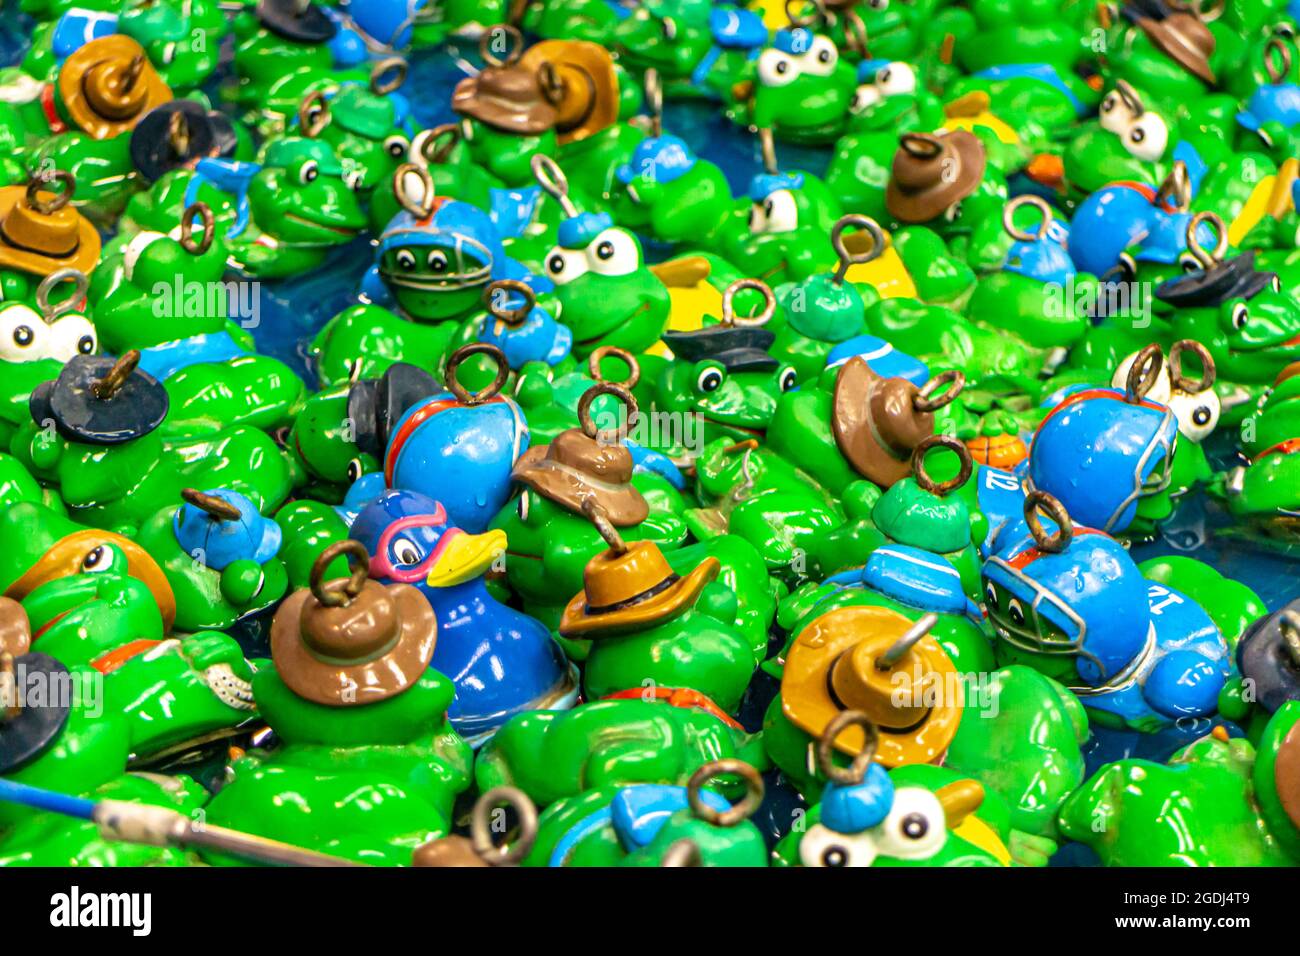 Children's game Duck fishing at a fair. Lots of green and blue plastic frogs and plastic ducks in a pool of water with a ring for fishing on their hea Stock Photo